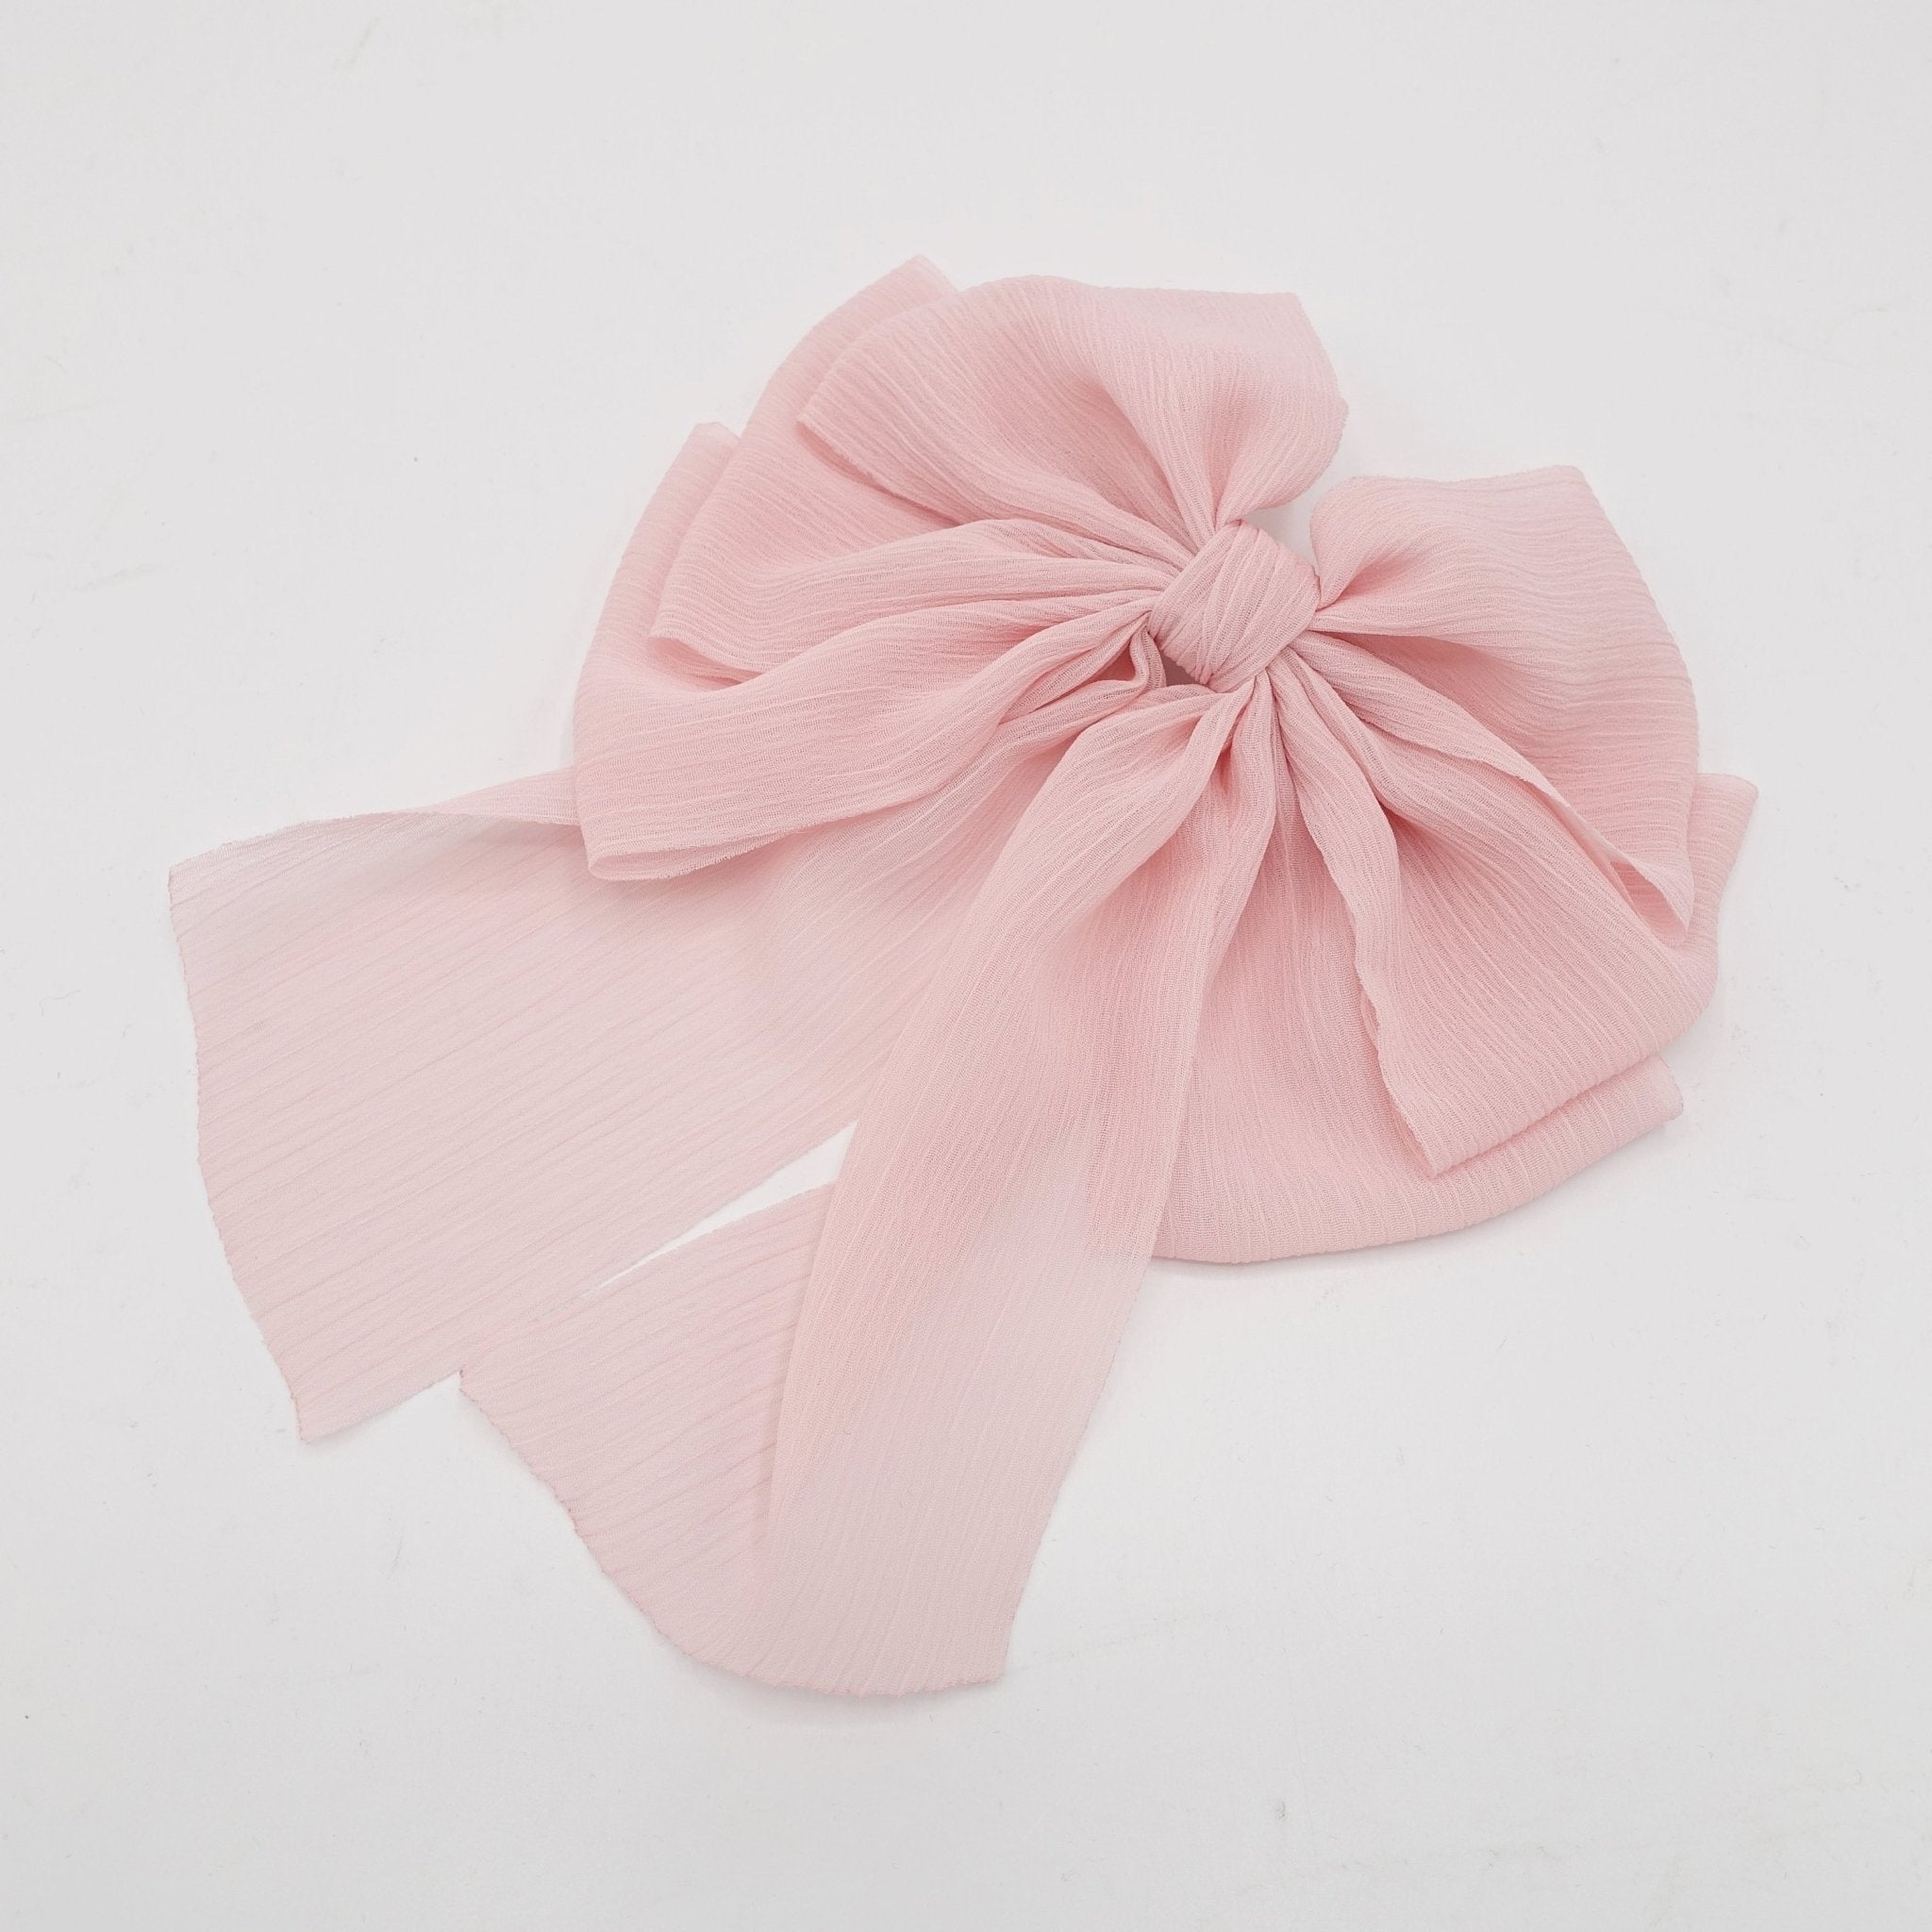 VeryShine double layered bow wide tail women hair accessory chiffon volume hair accessory for women